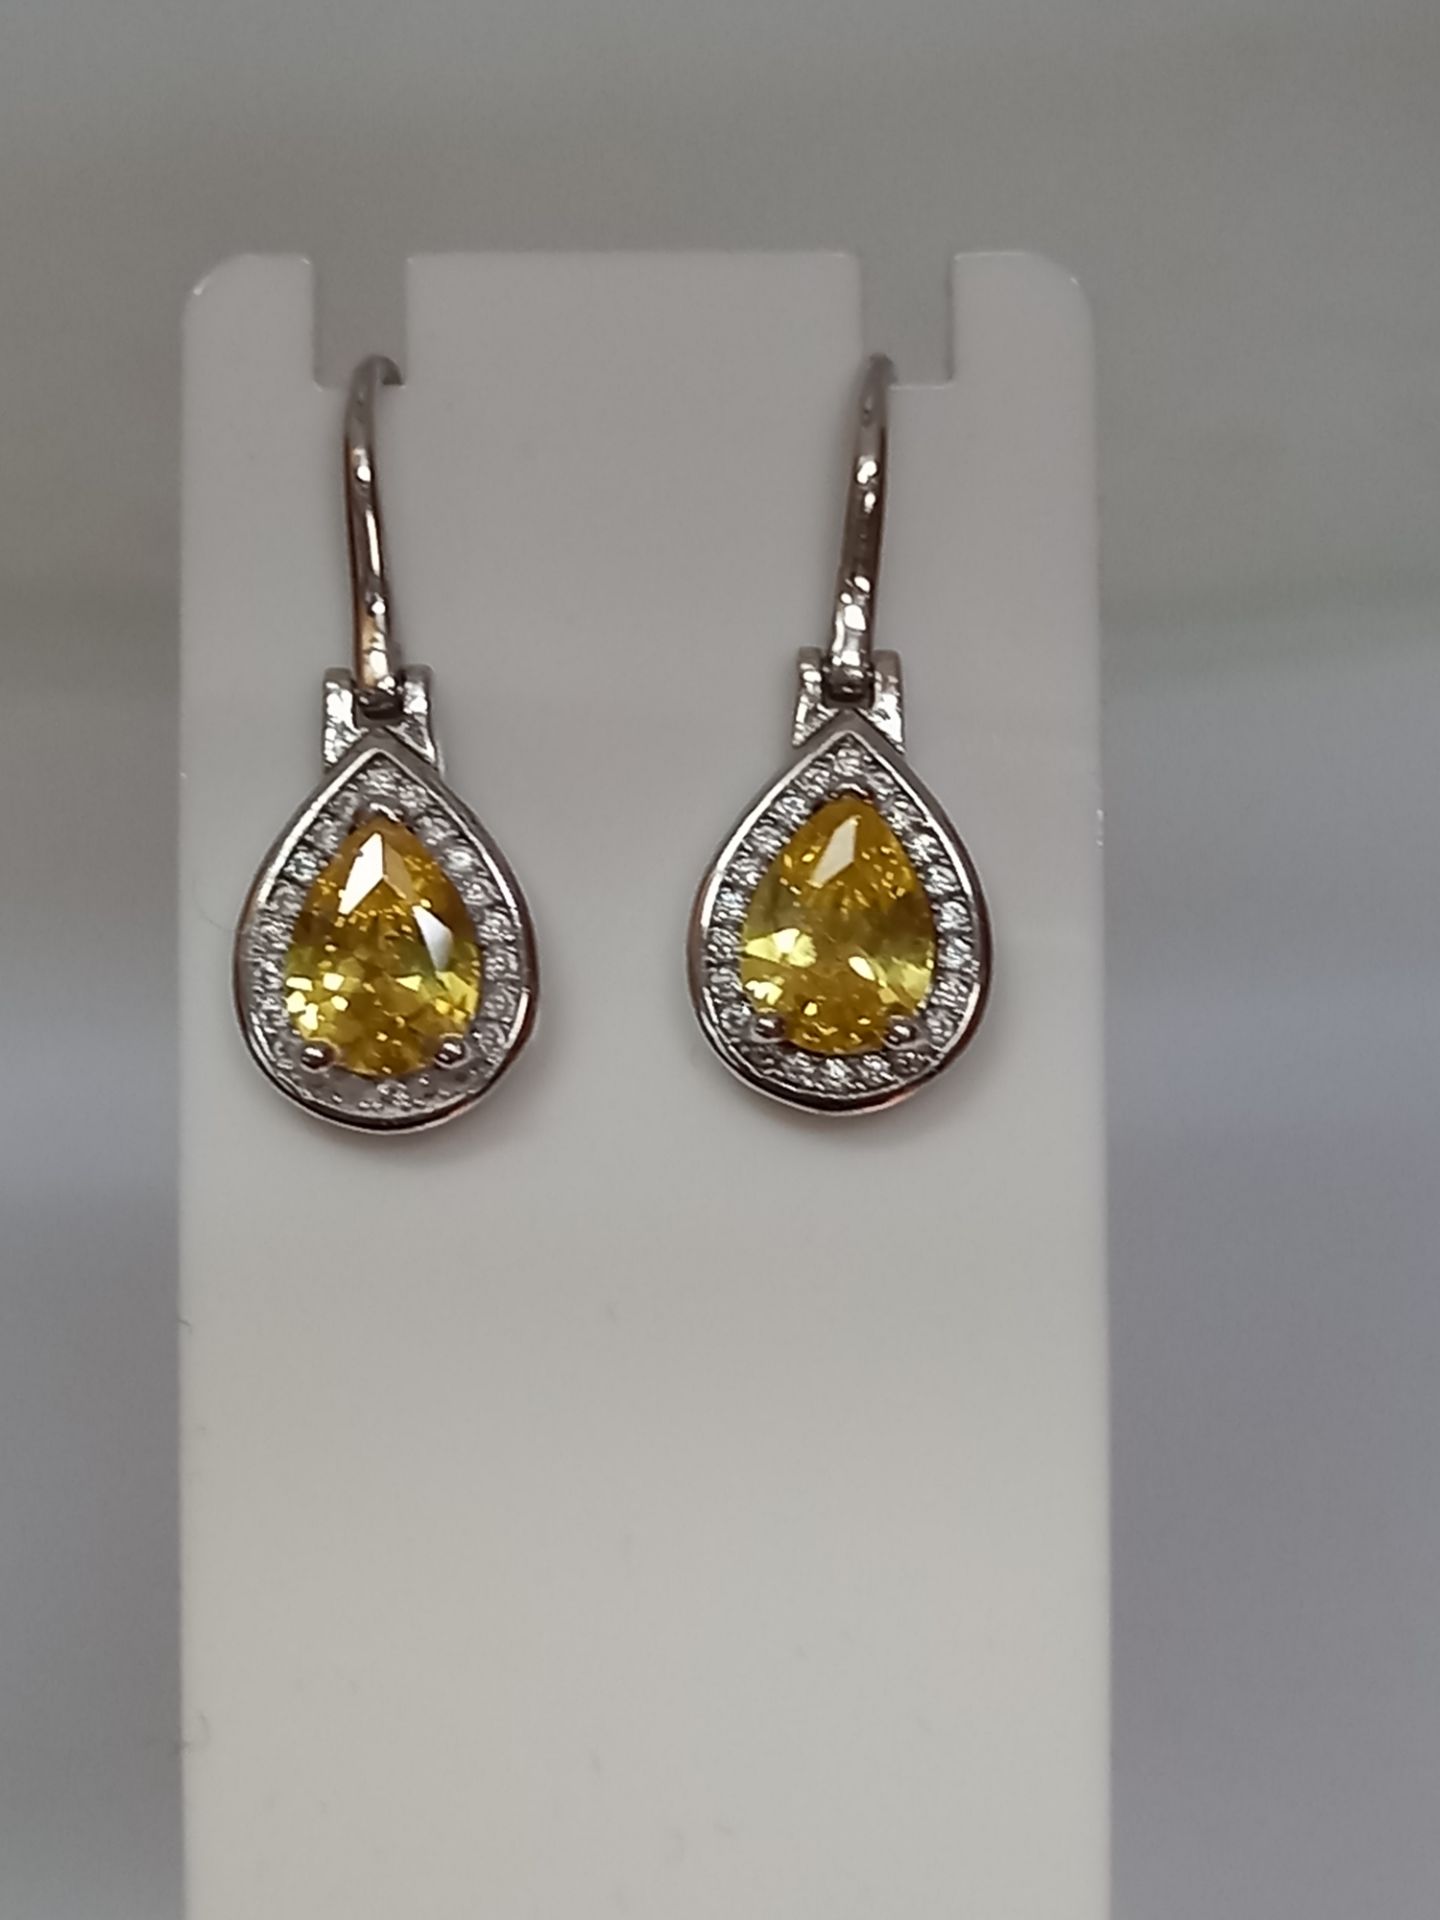 SILVER HOOK EARRINGS WITH CUBIC ZIRCONIA &YELLOW STONE